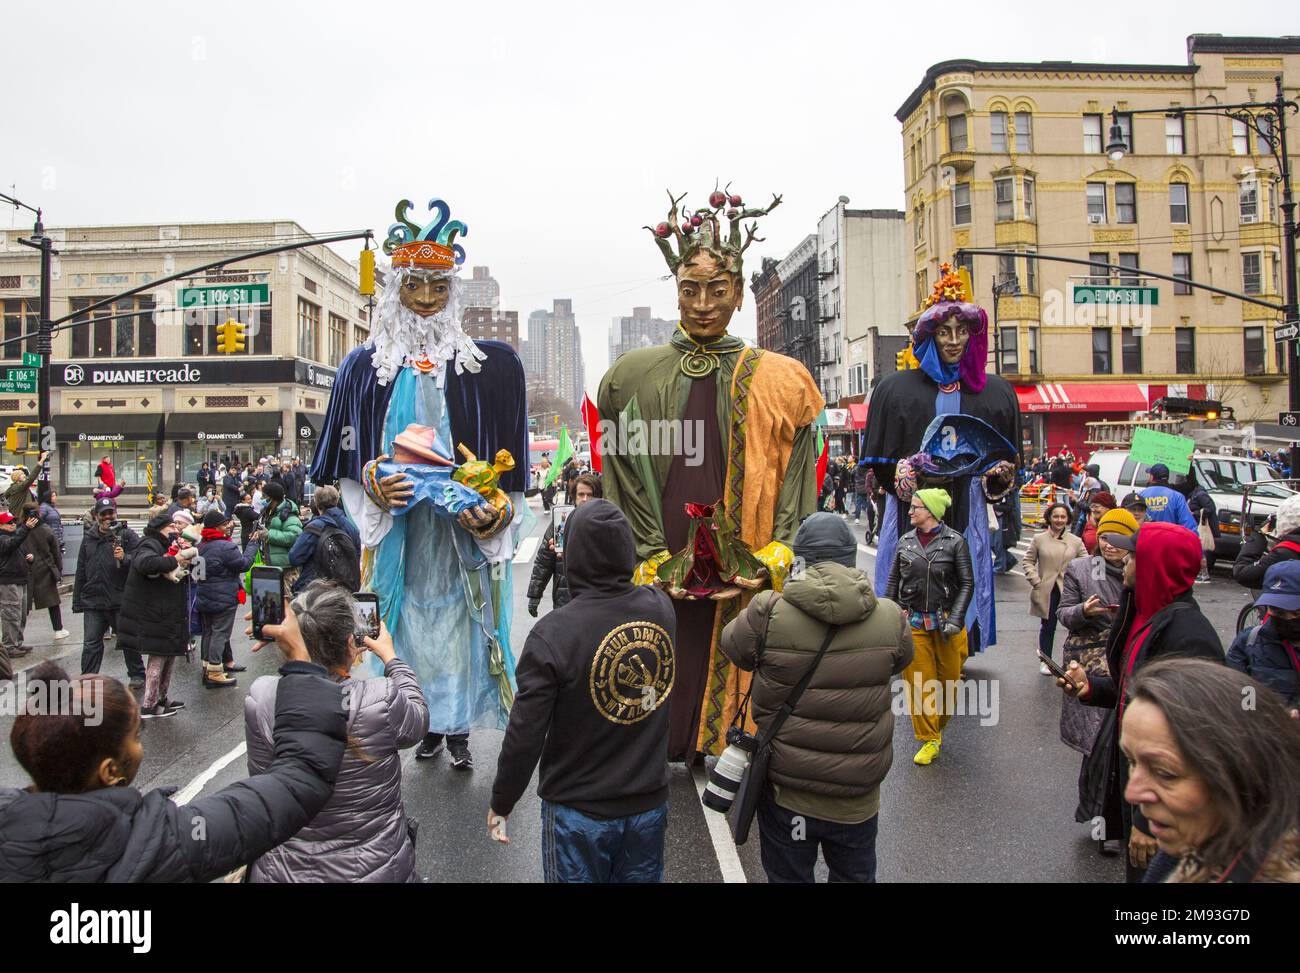 2023 Three Kings Day Parade along 3rd Avenue in Spanish Harlem, hosted by El Museo del Barrio, New York’s leading Latino cultural institution. One of the El Museo del Barrio large artistic puppets that lead the parade each year. Stock Photo